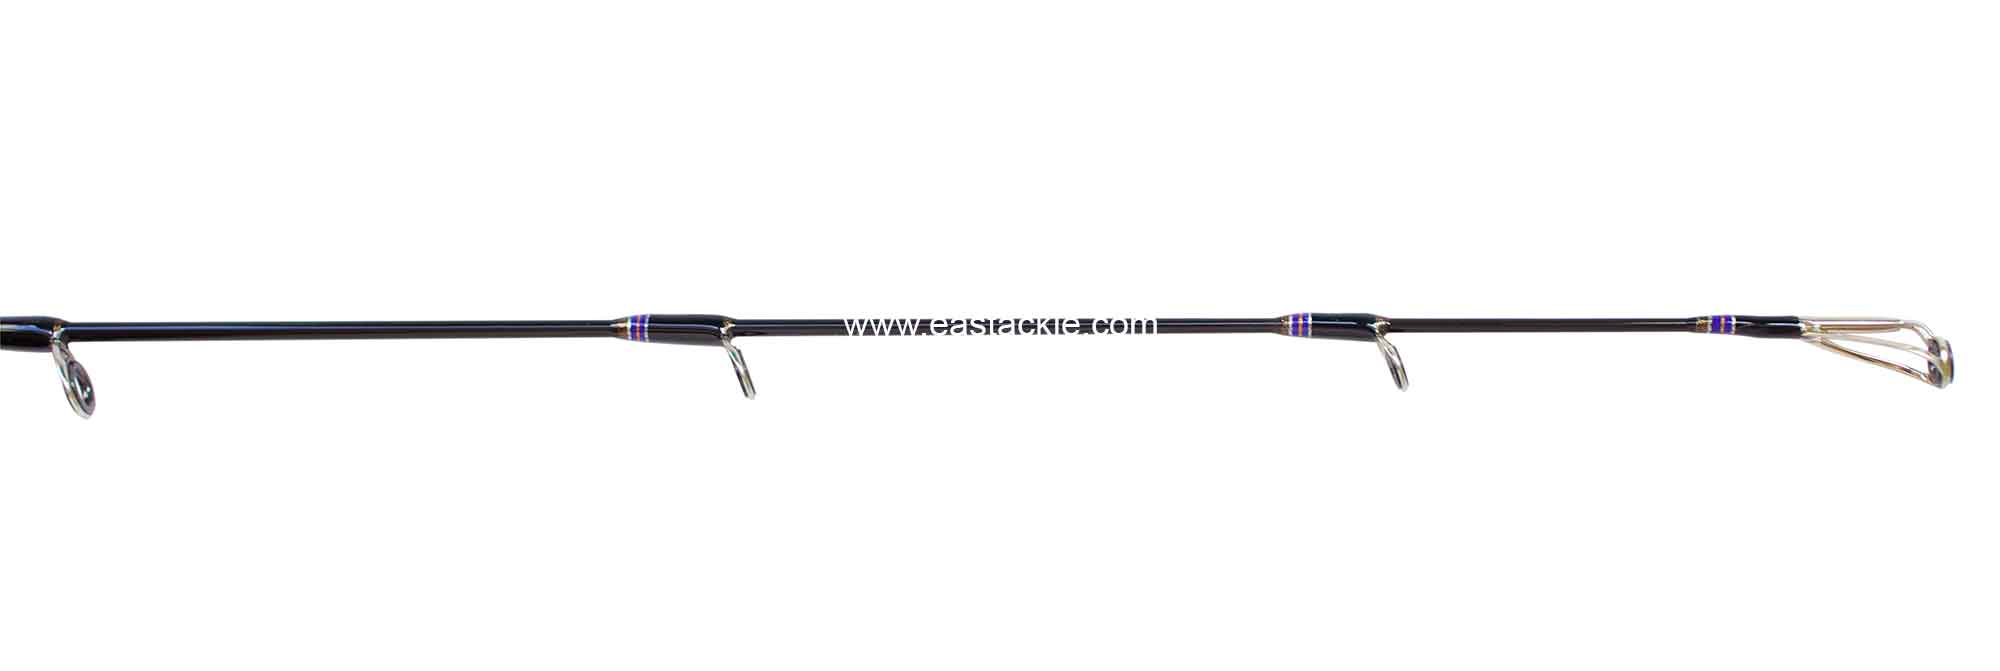 Megabass - Silver Shadow XX -56LJ - Spinning Rod - Tip Section